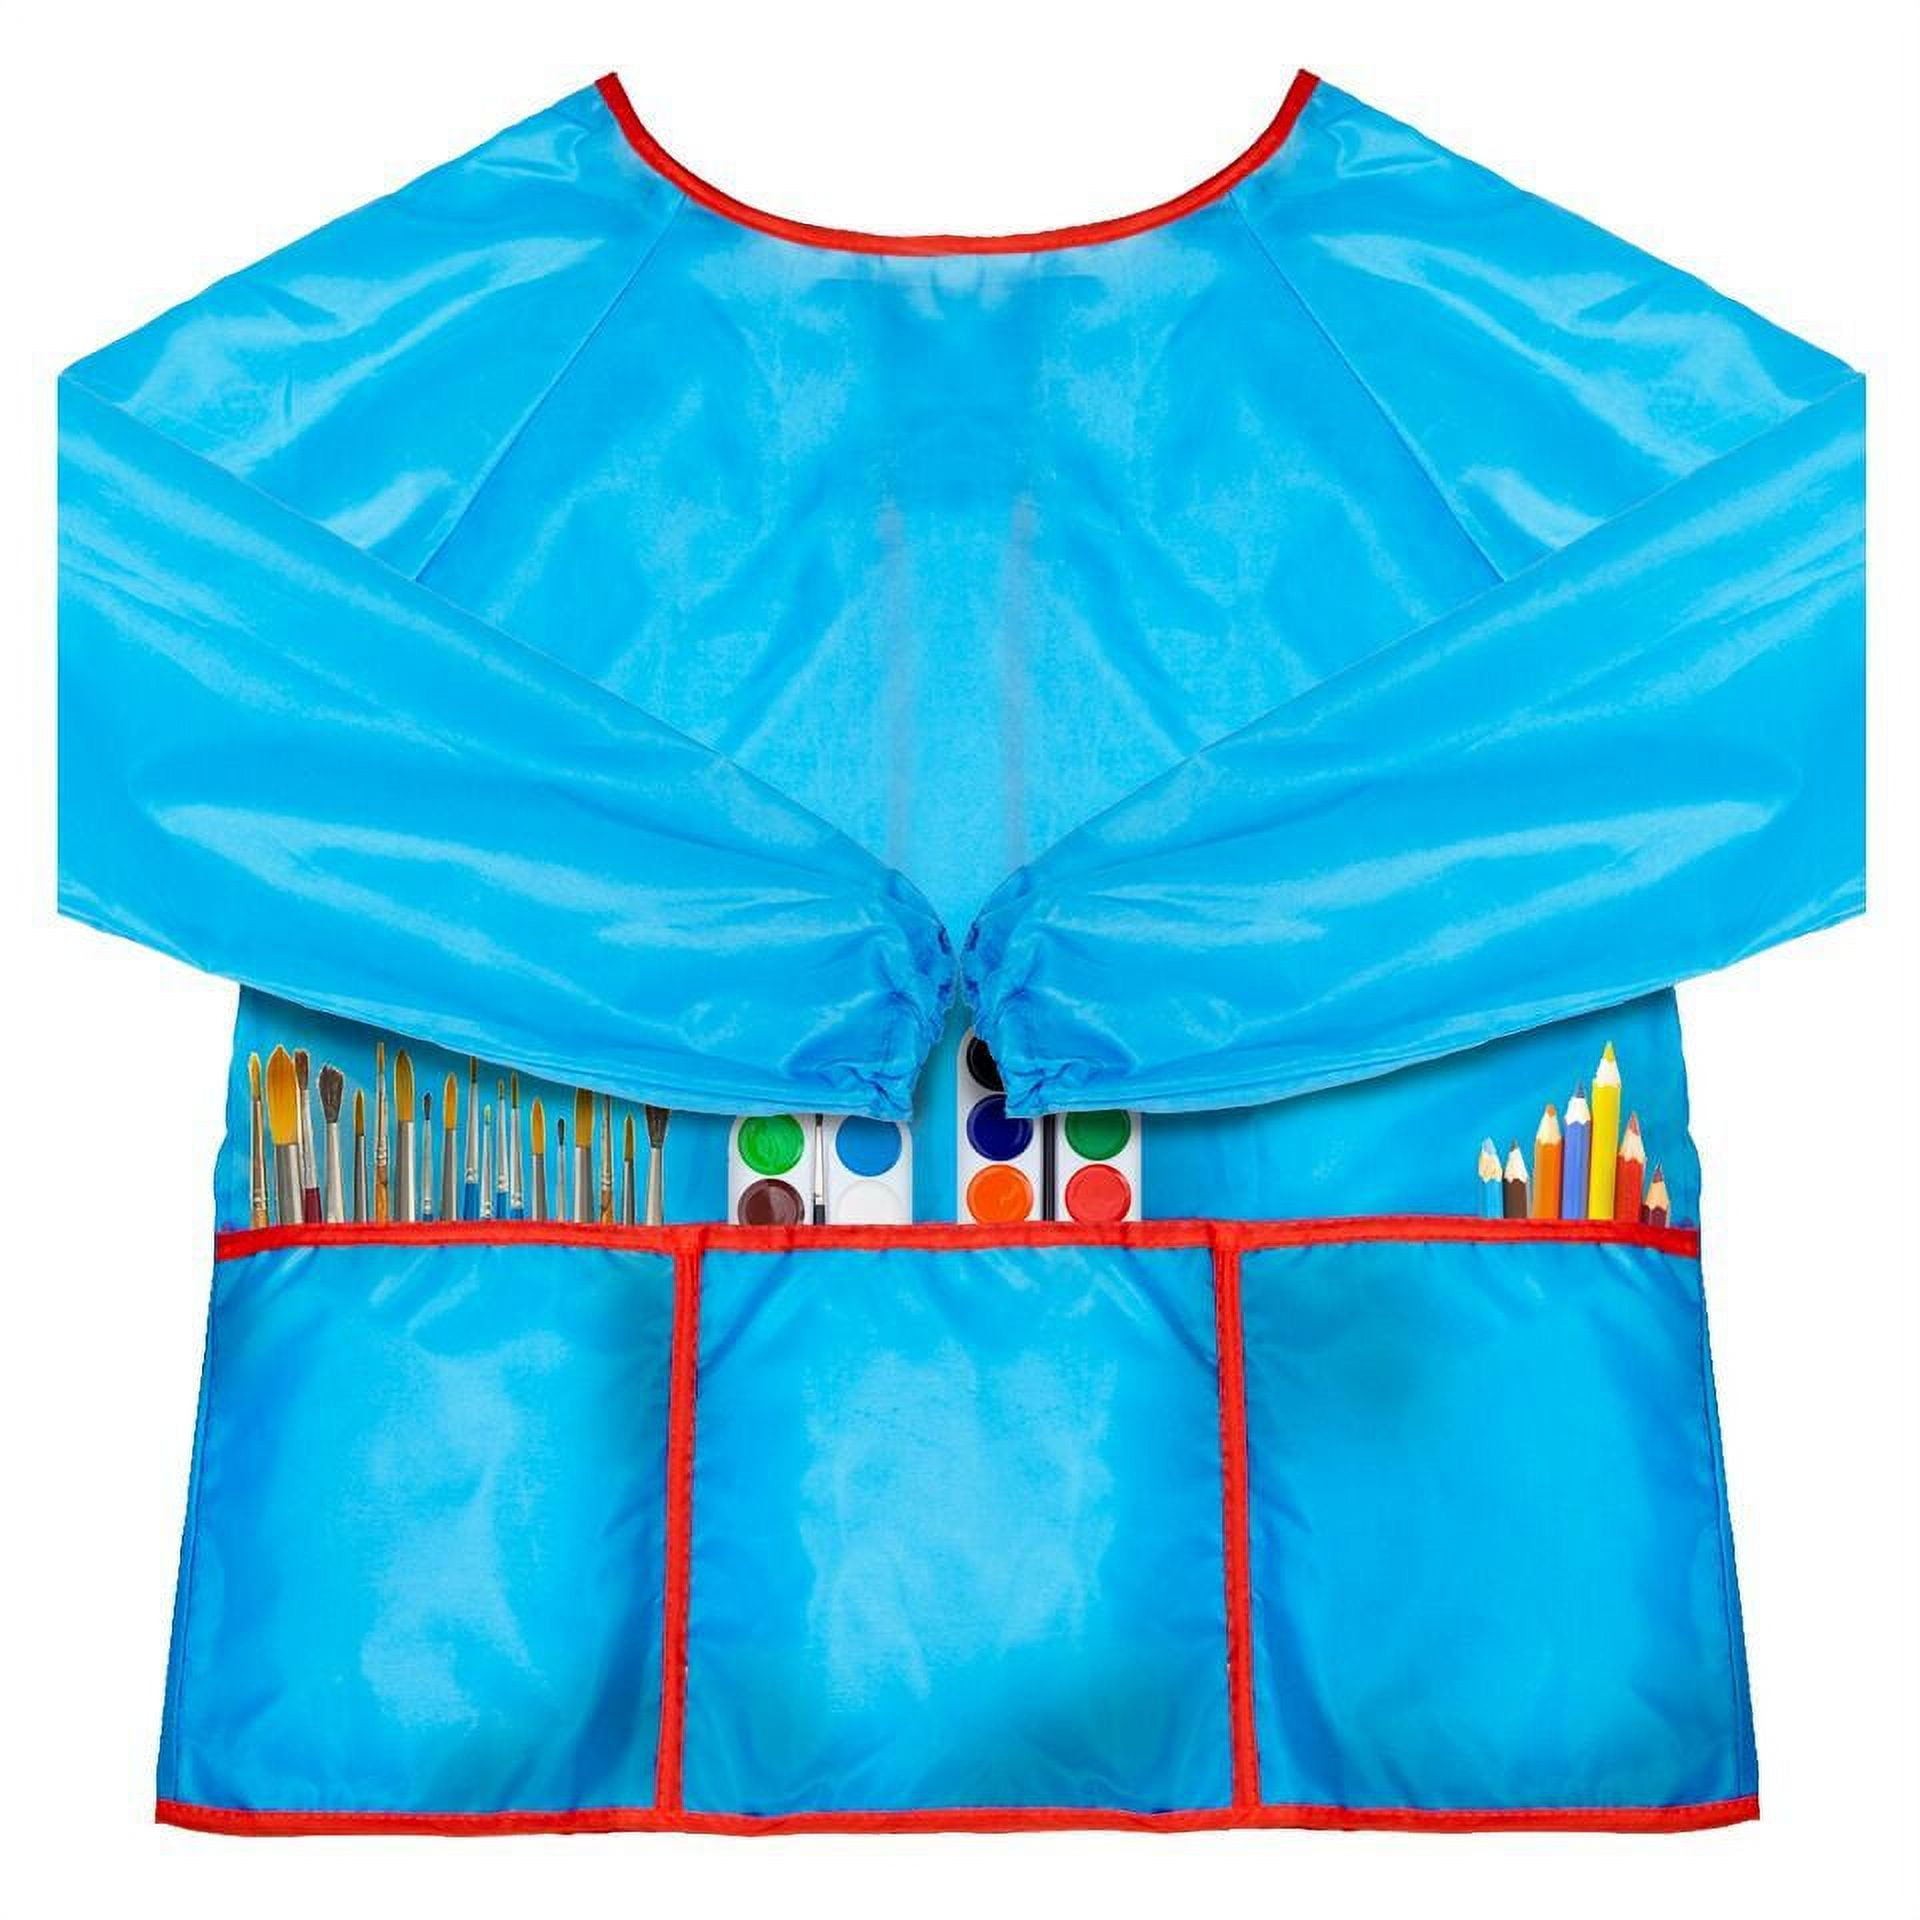 Paint Apron For Kids Long Sleeve Polyester Painting Smocks Adjustable  Waterproof Comfortable Kids Smocks With Big Pocket For - AliExpress